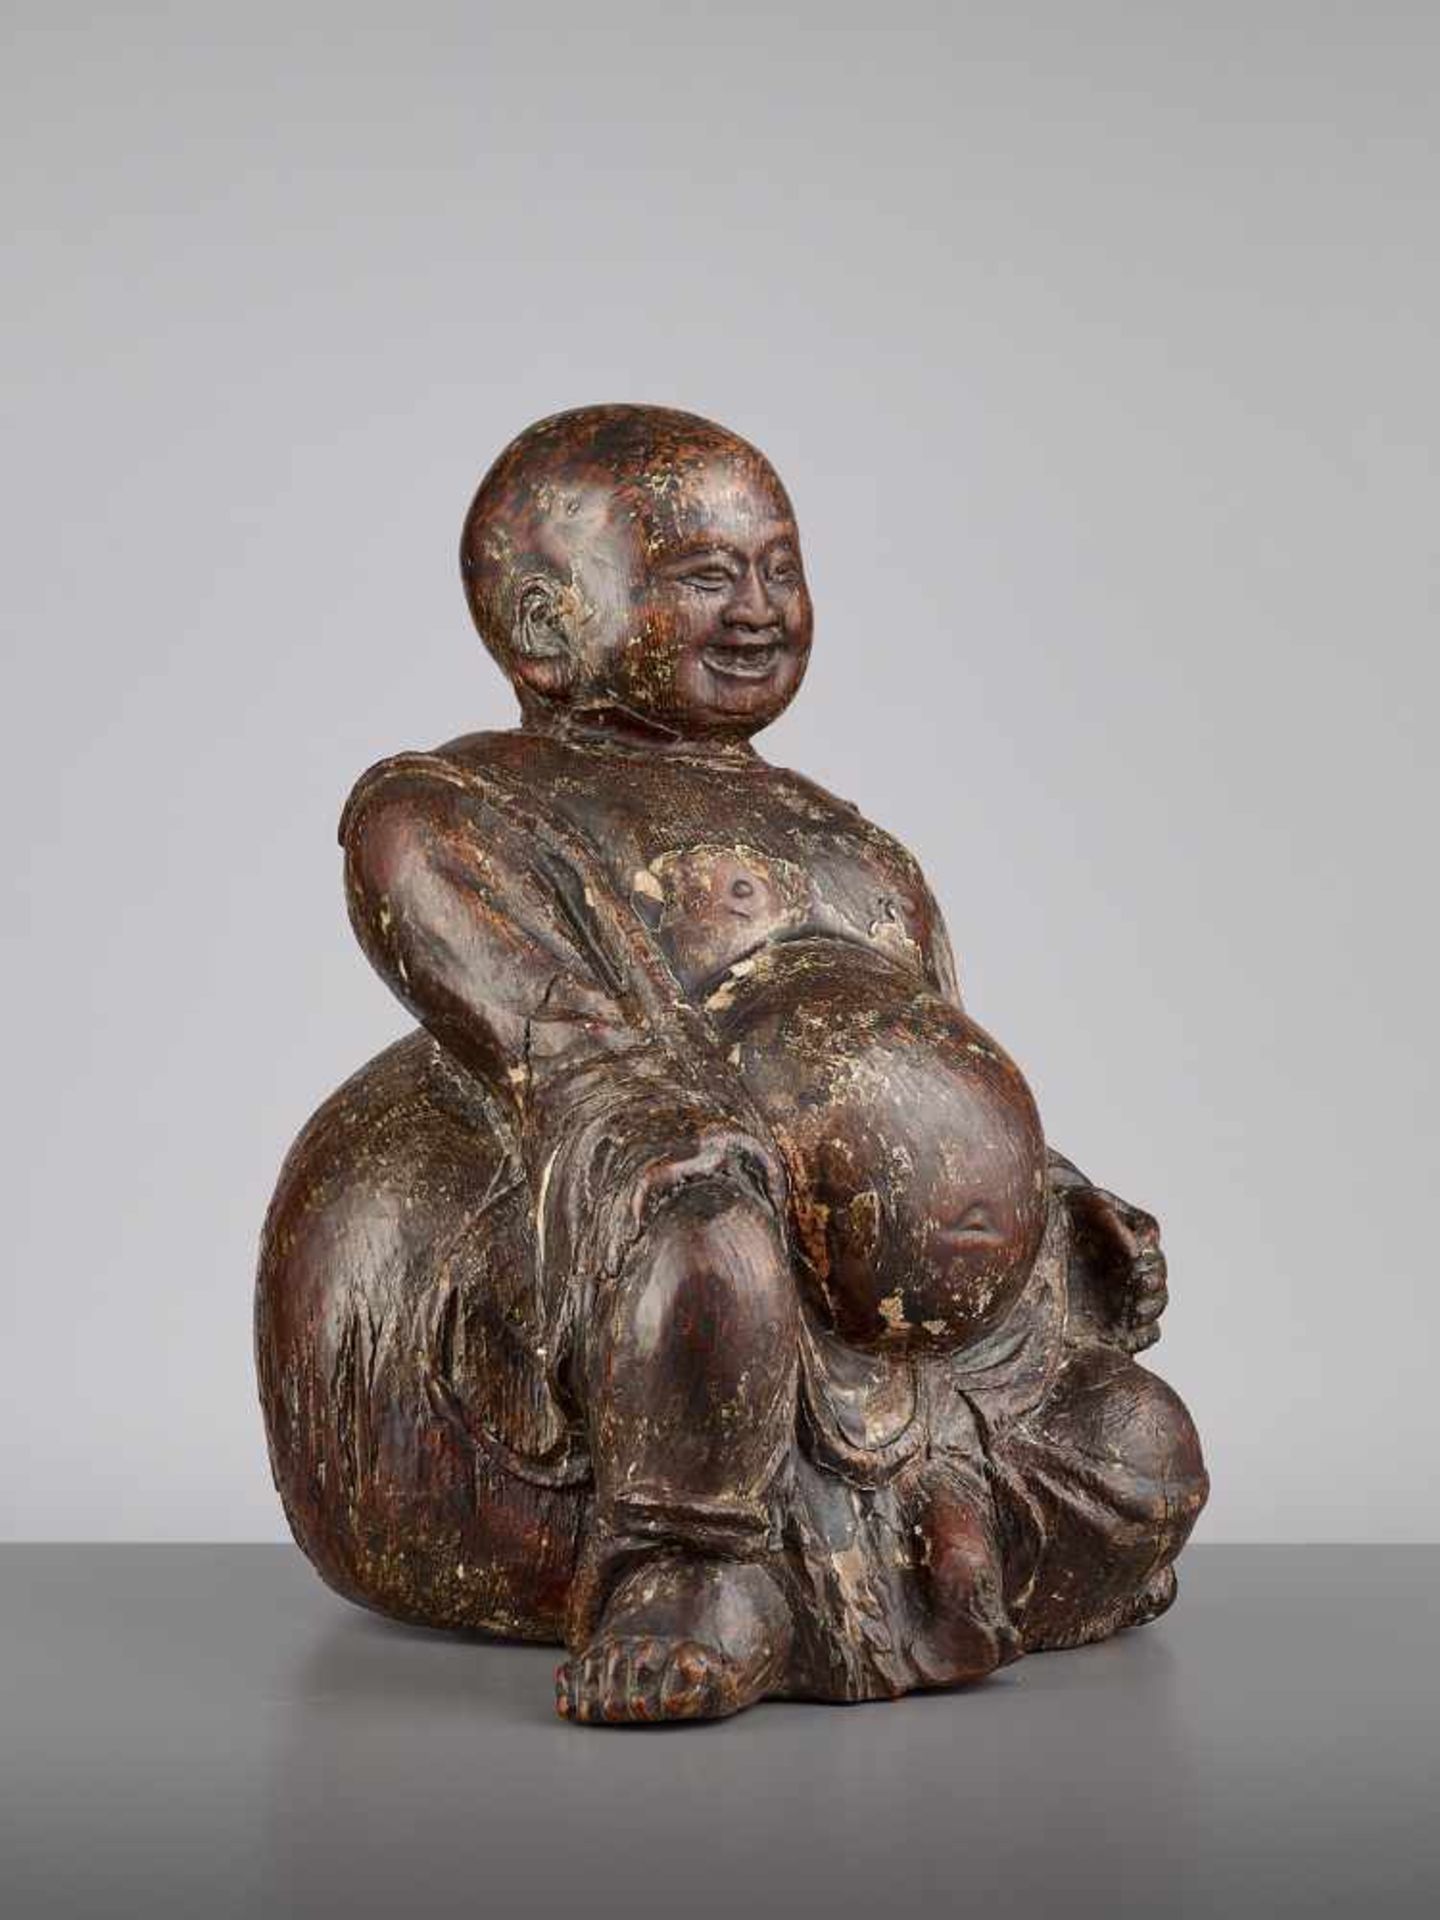 AN EXPRESSIVE WOOD BUDAI, MINGChina, 15th - 16th century. This earthy yet radiant sculpture of Budai